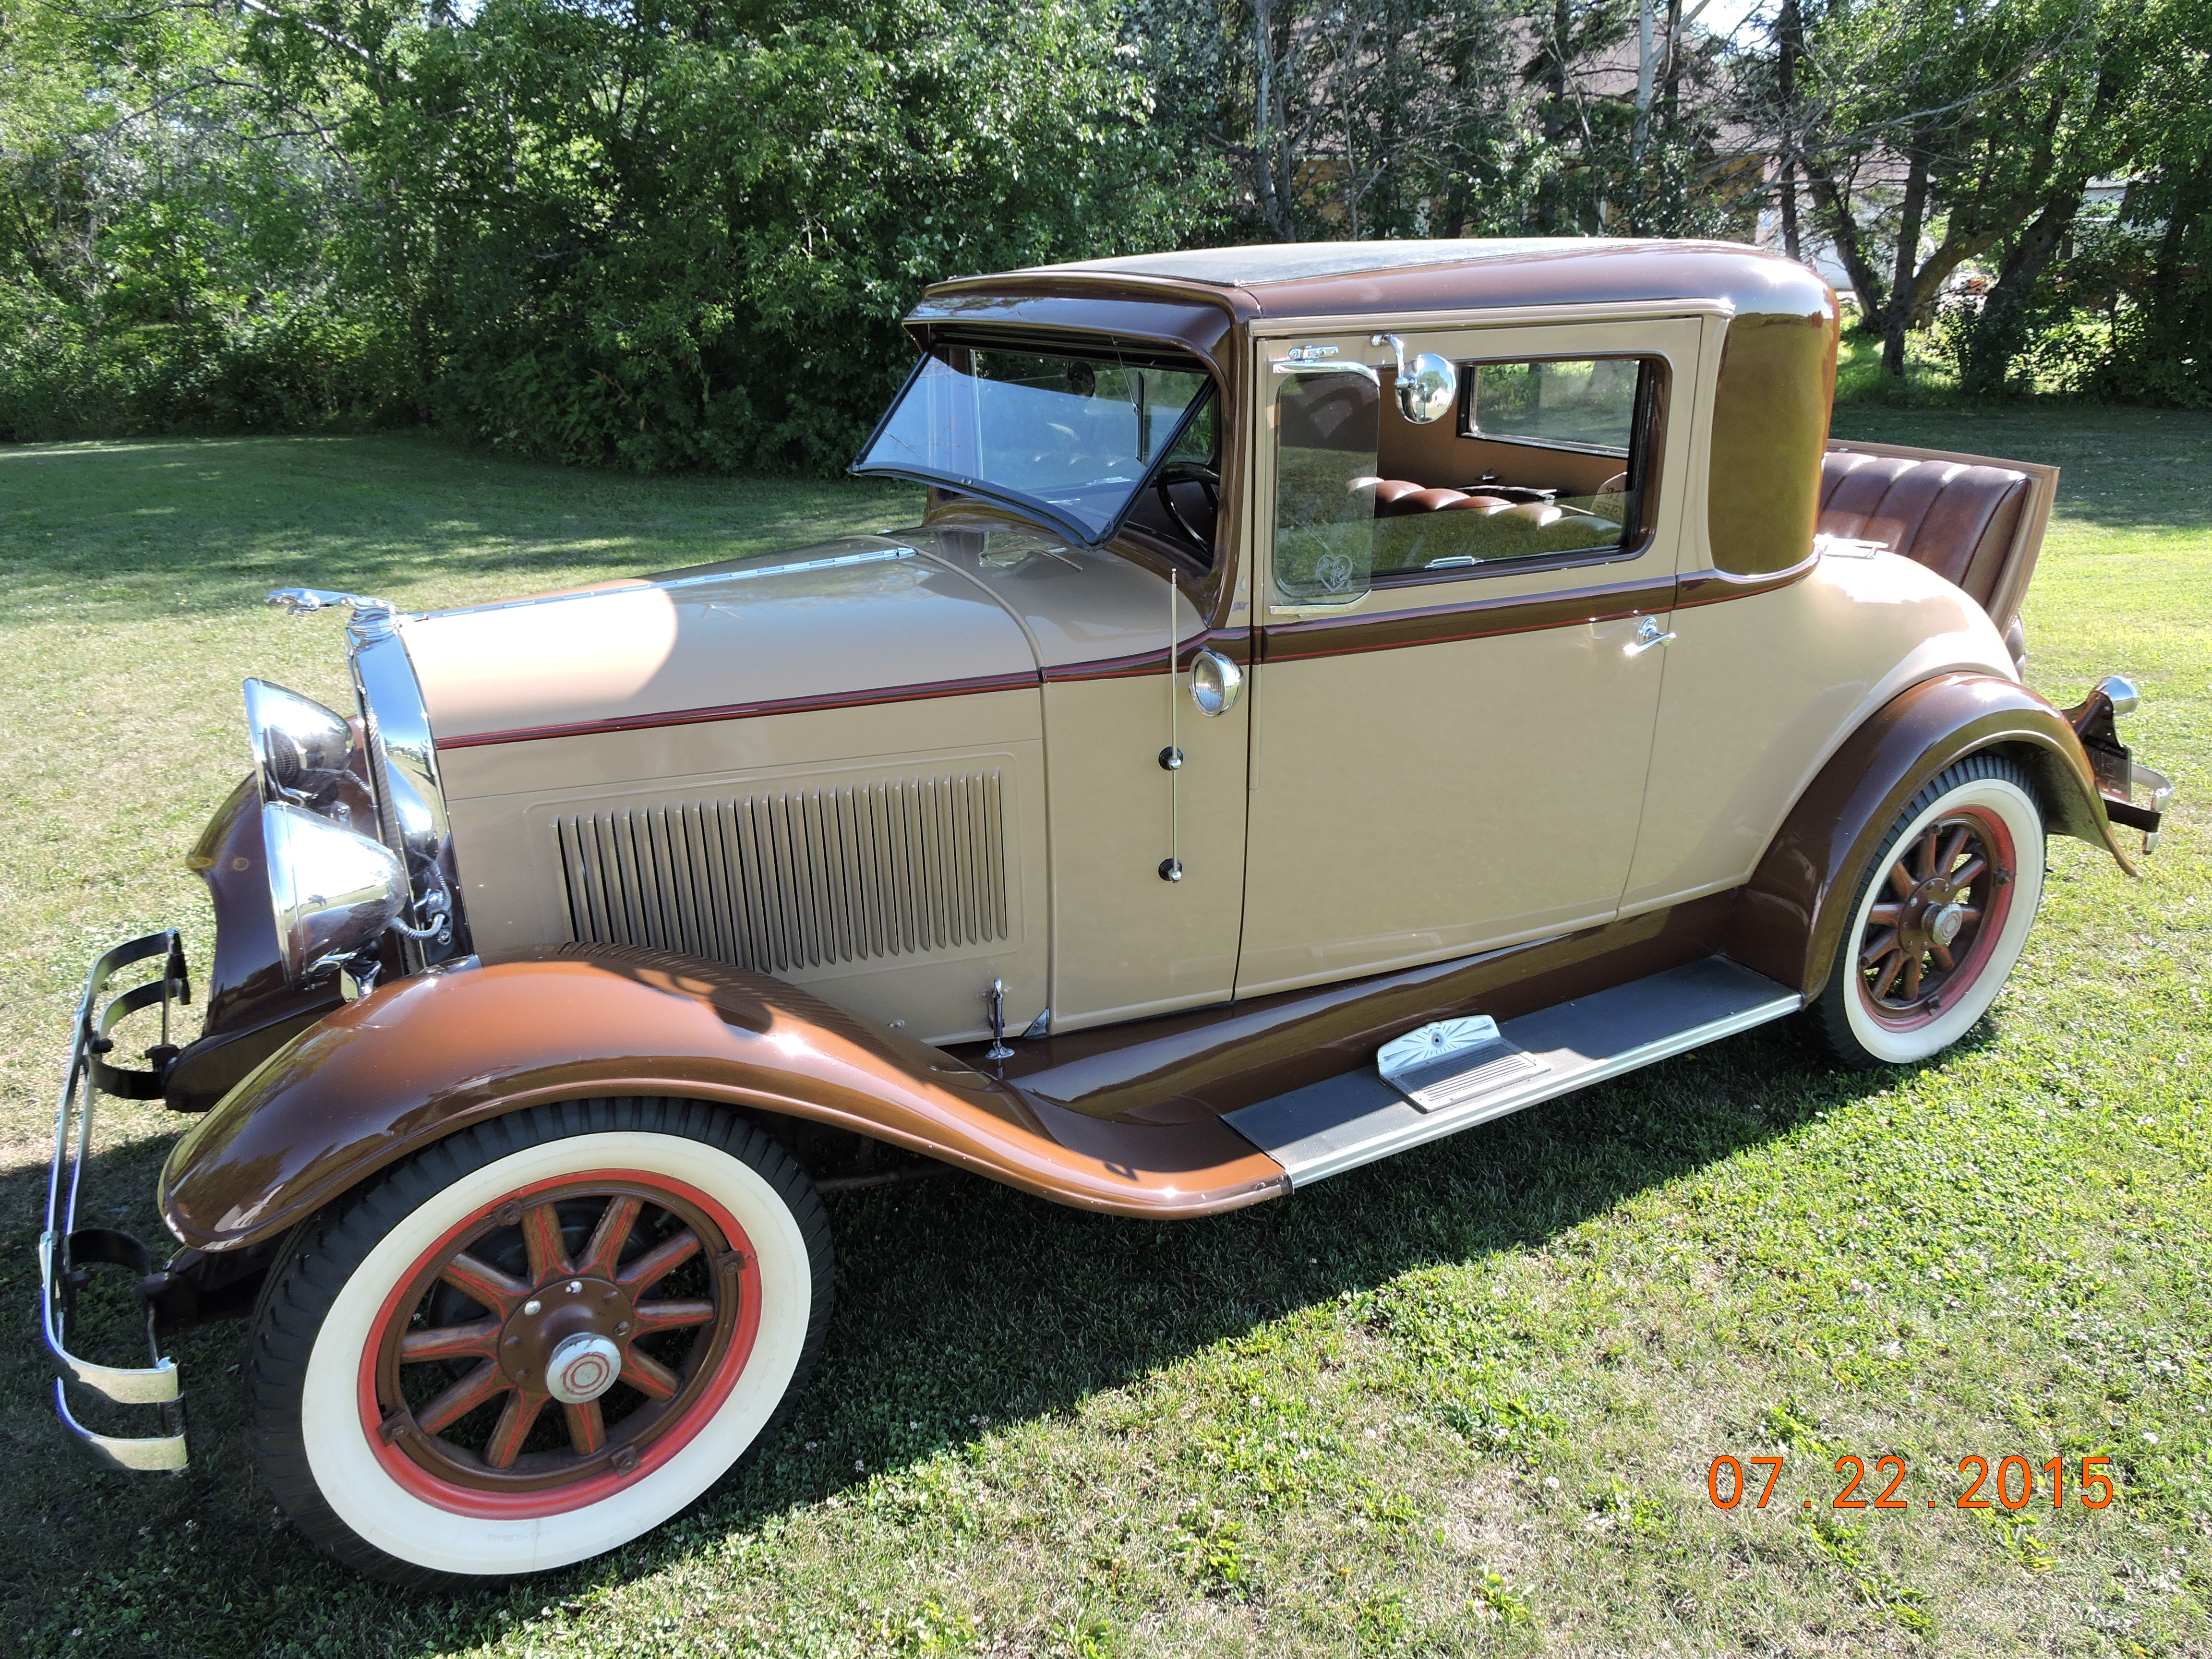 An example of a fully restored 1932 Essex Super Six, this being the two seater with rumble seat body style. (Picture courtesy jimsclassiccorner.com)